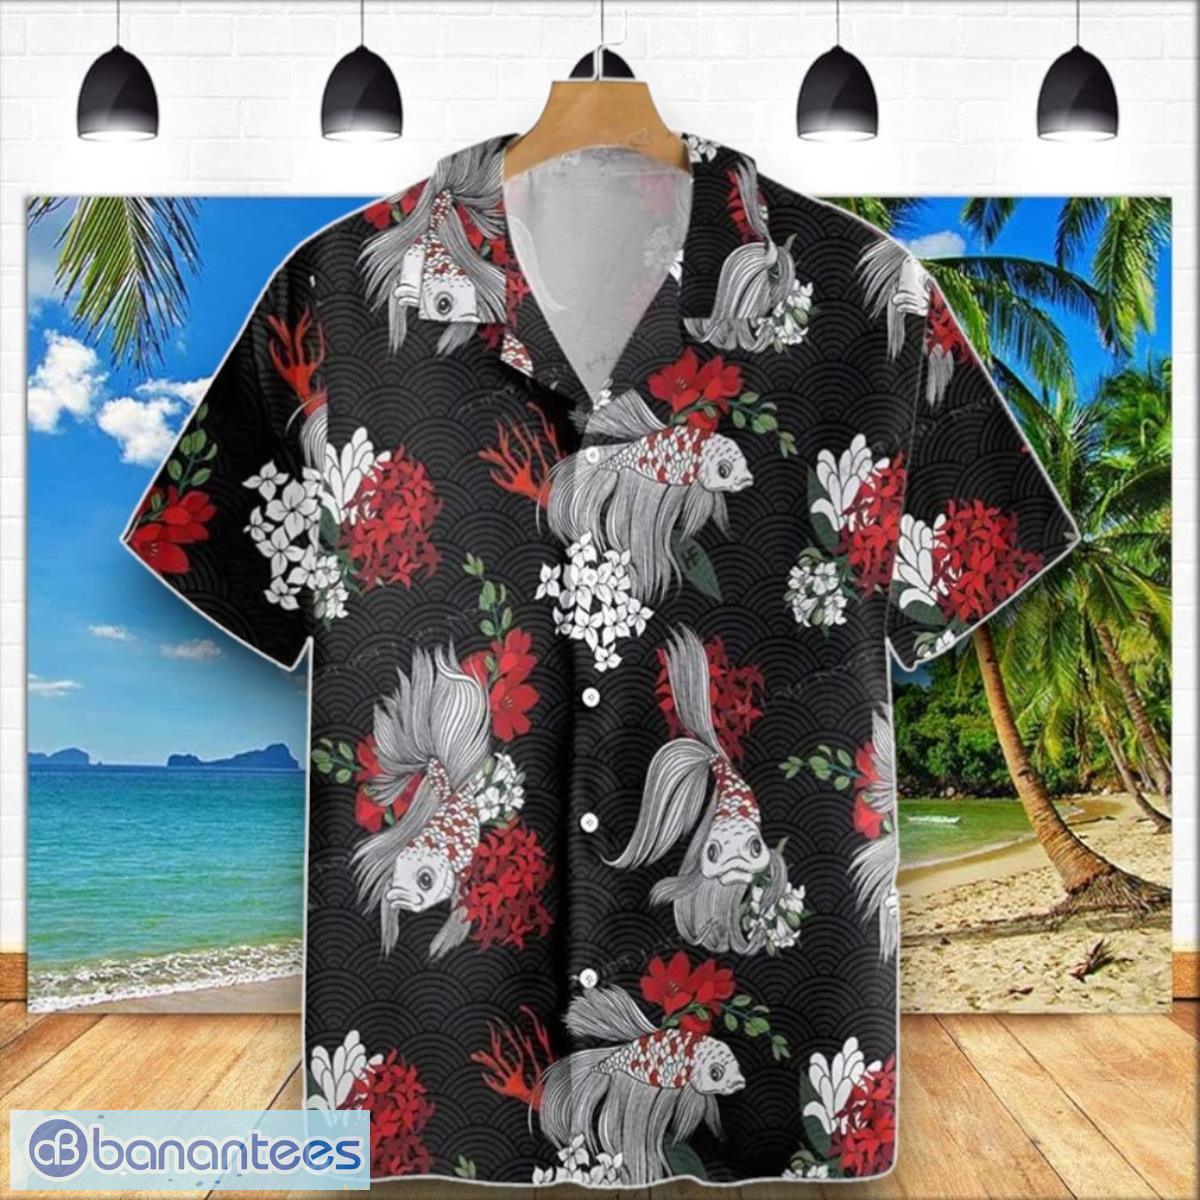 Black Koi Fish And Flowers Hawaiian Shirt Style Gift For Men And